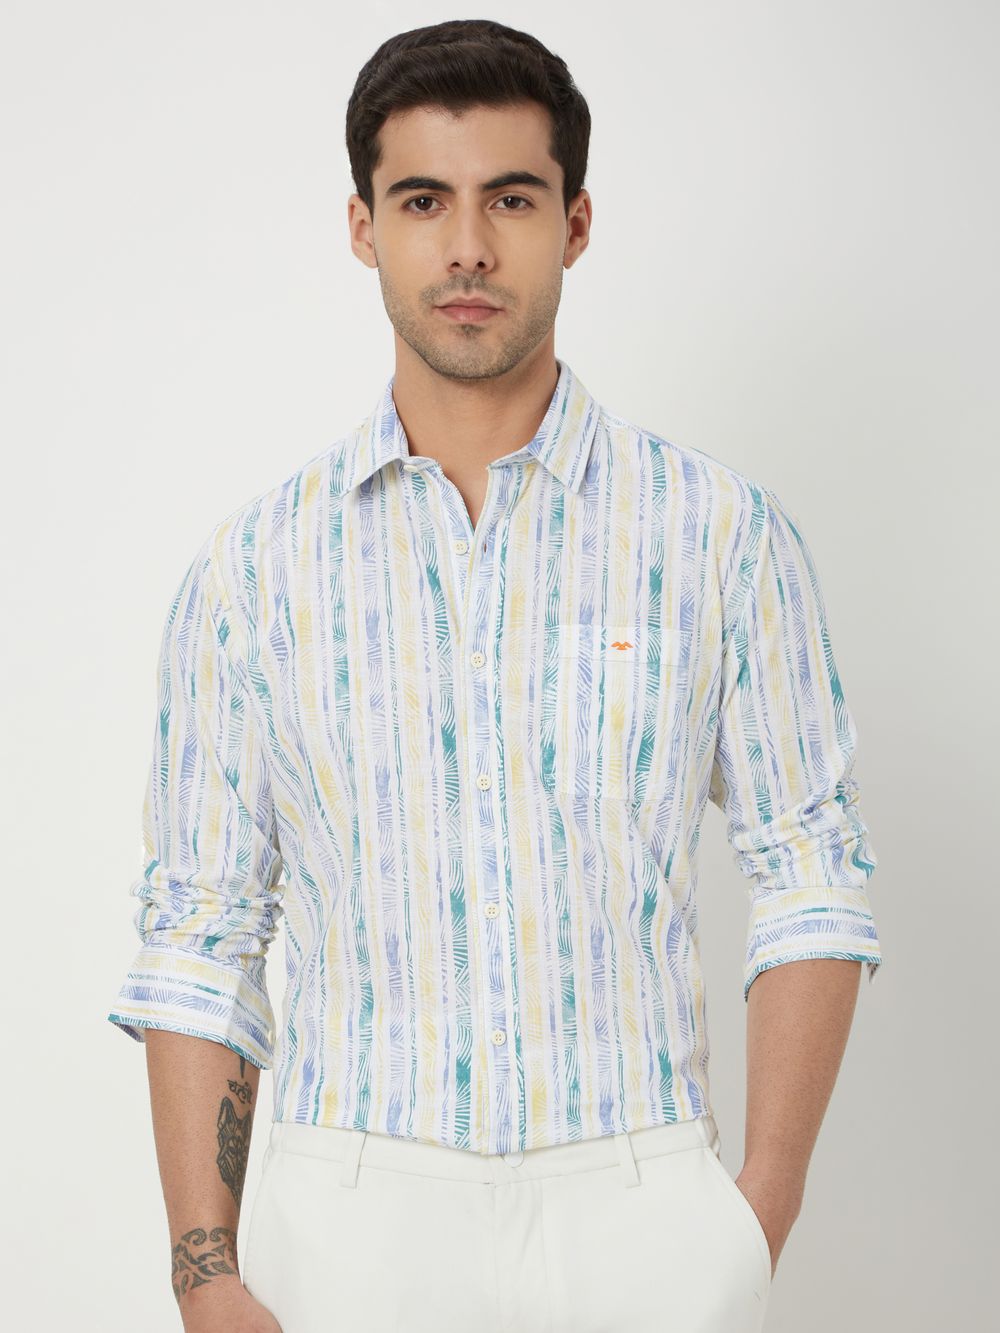 Off White & Yellow Leaf Print Slim Fit Casual Shirt